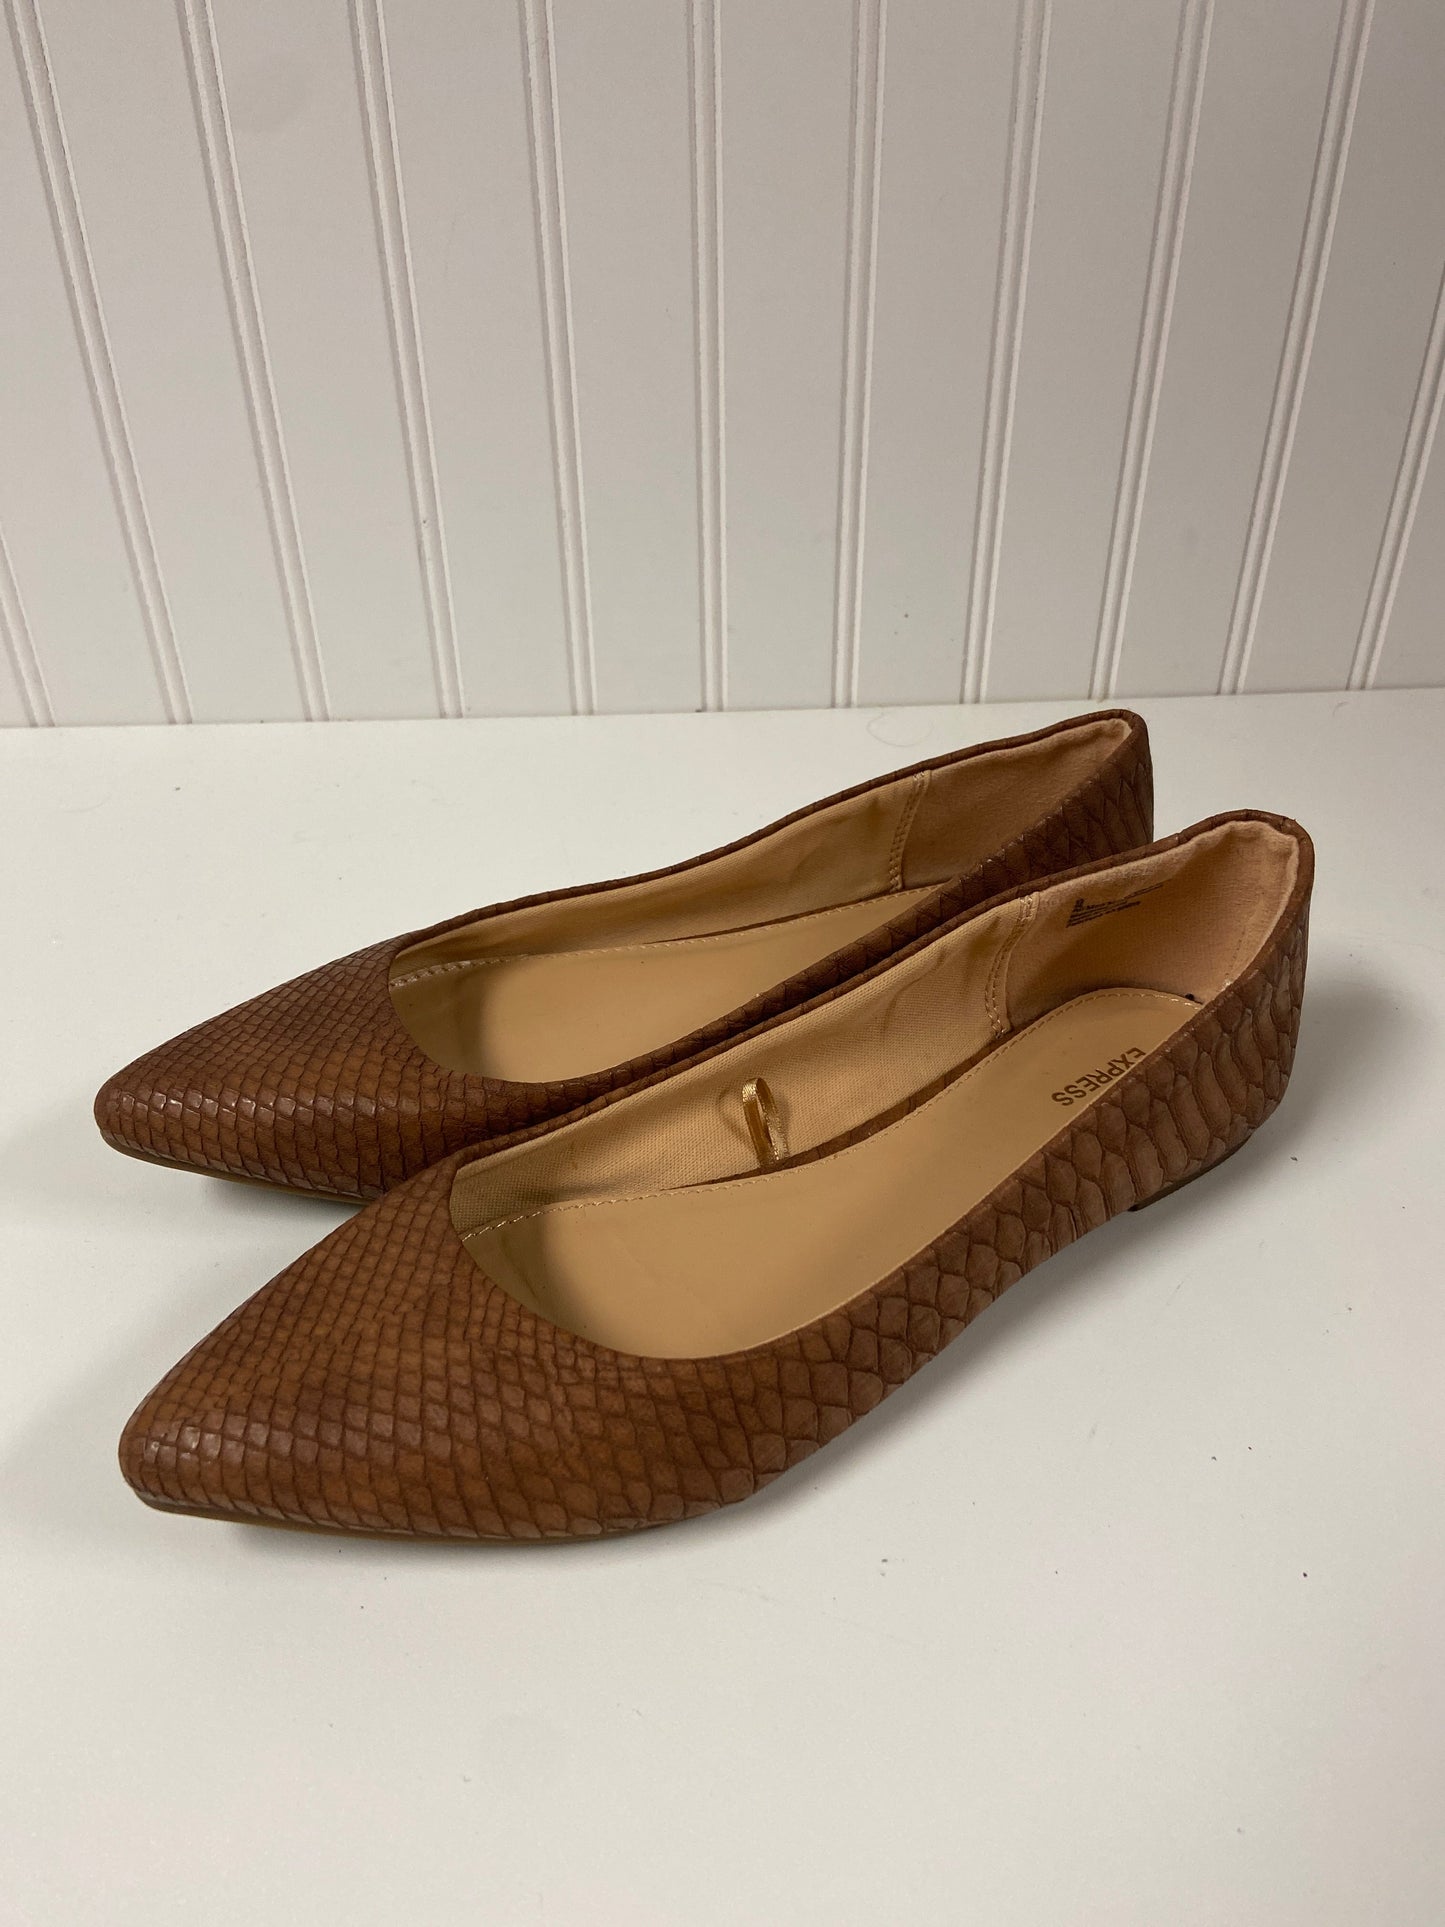 Brown Shoes Flats Express, Size 9